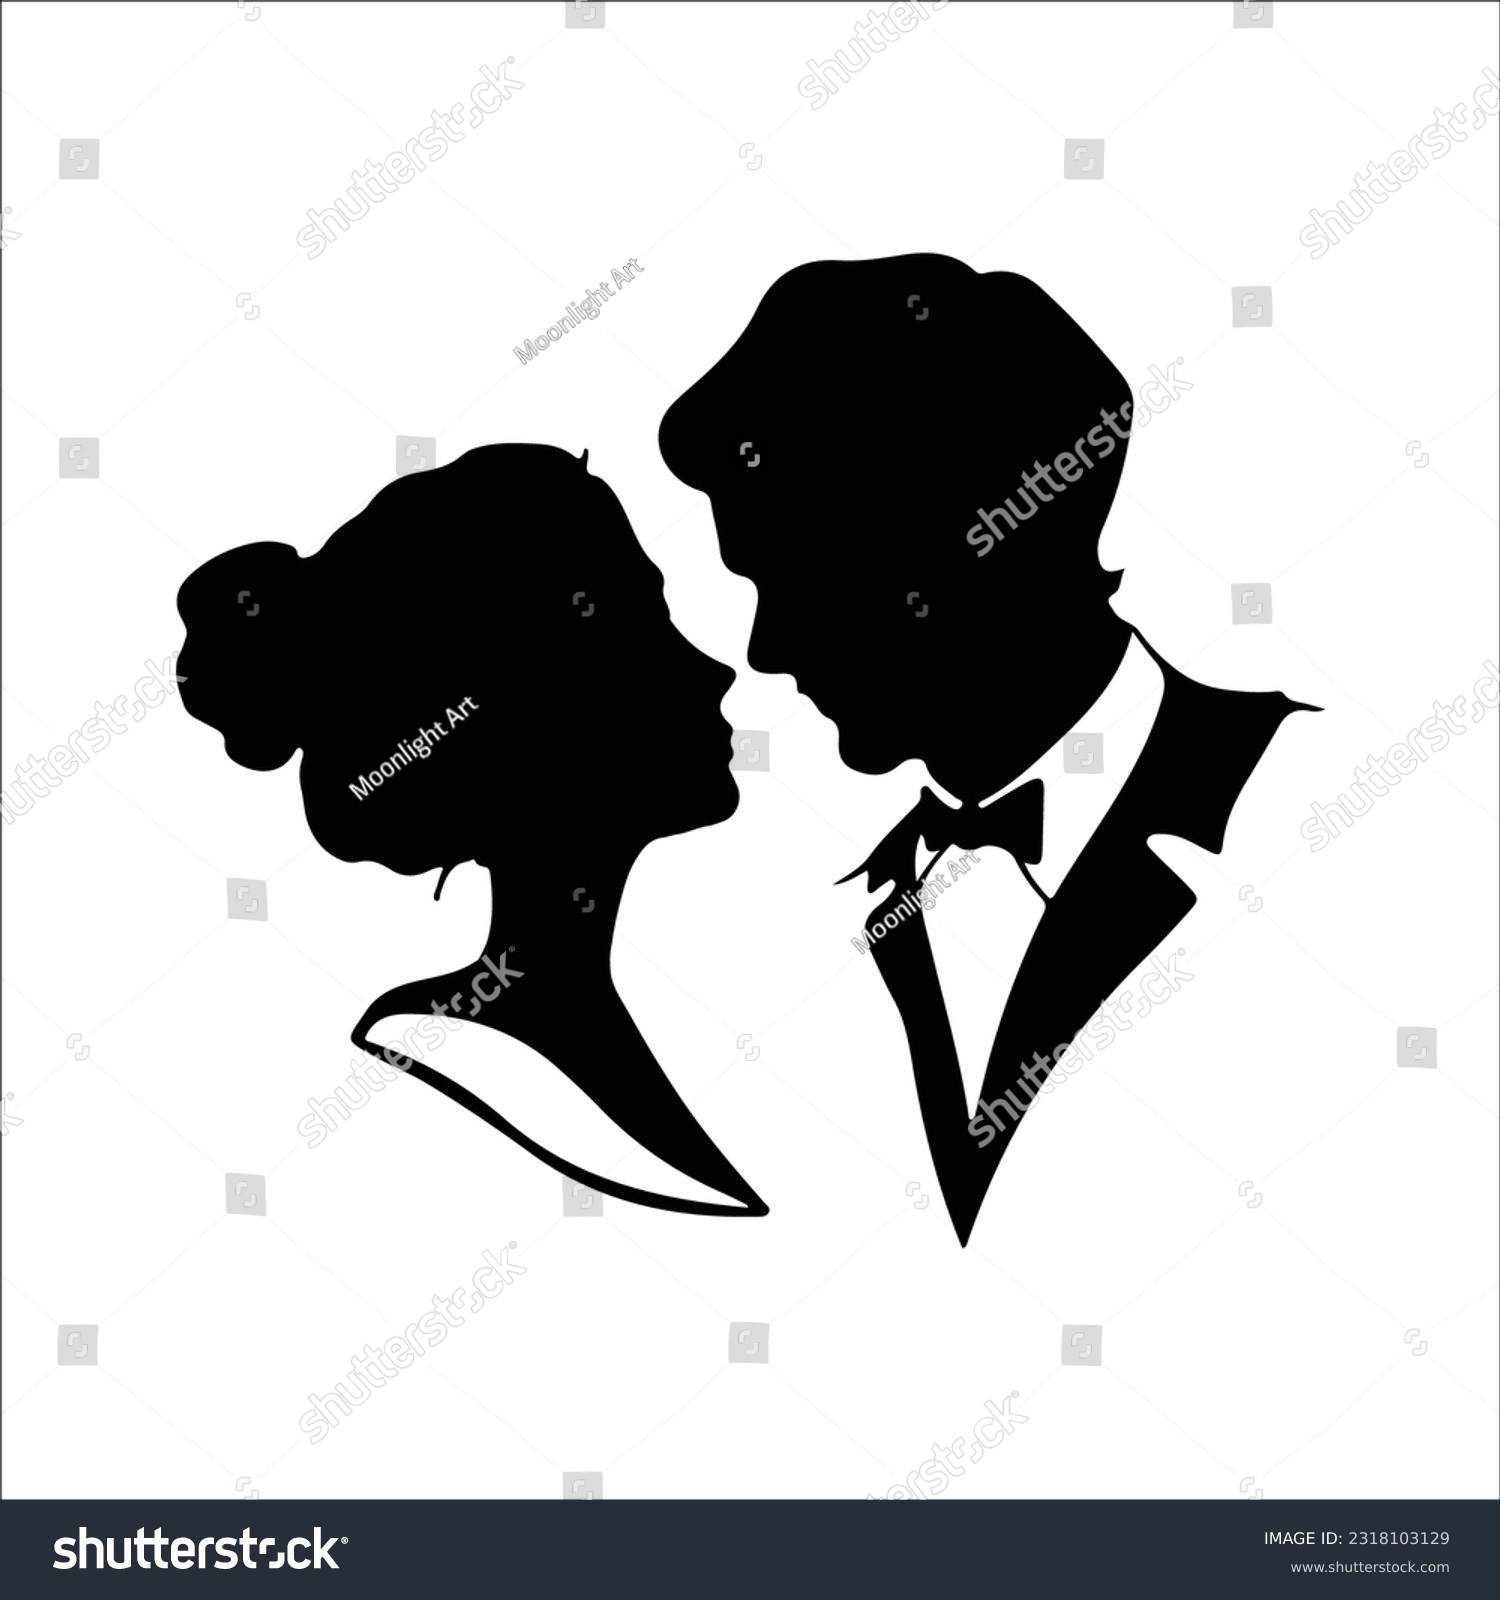 SVG of Bride and Groom svg, Wedding figure svg, Wedding ornament svg, details dress , silhouette, mr and mrs, marriage, engagement, husband and wife, just married, wedding sign, hubby and wifey svg